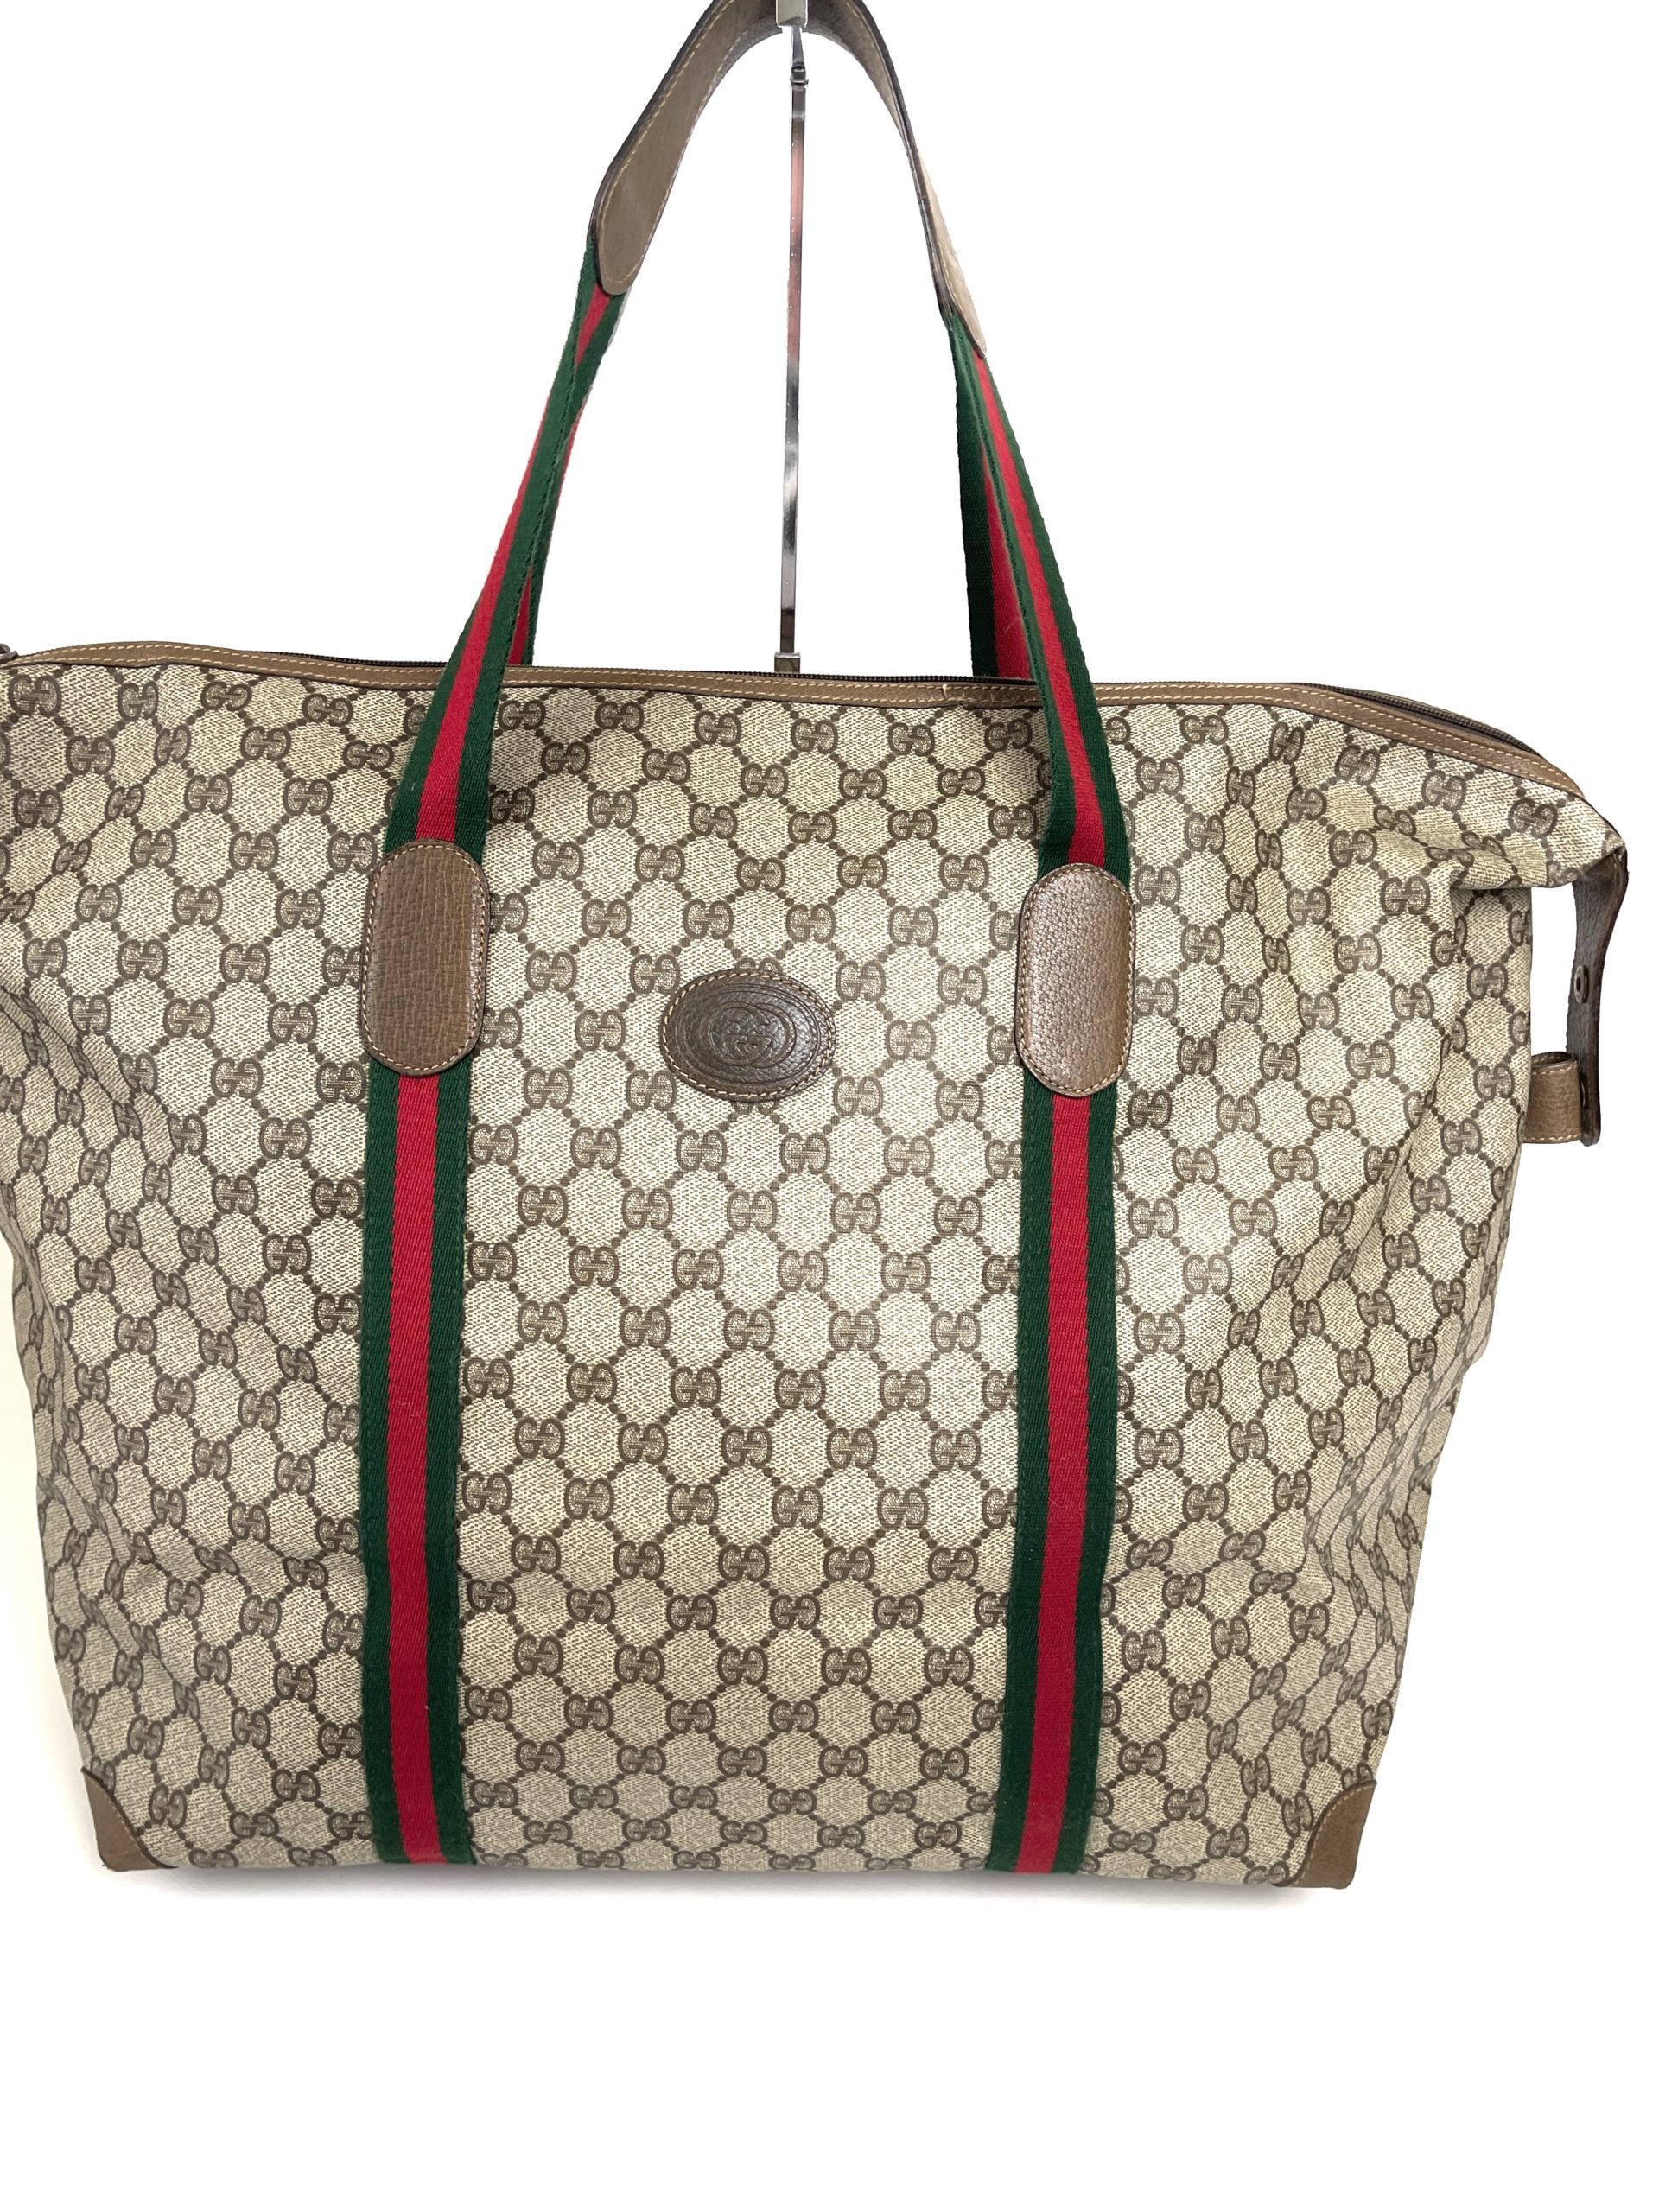 Authenticated Used GUCCI Gucci GG Supreme Tote Bag 495559 PVC Leather Gray  Multicolor 2WAY Shoulder Patch 